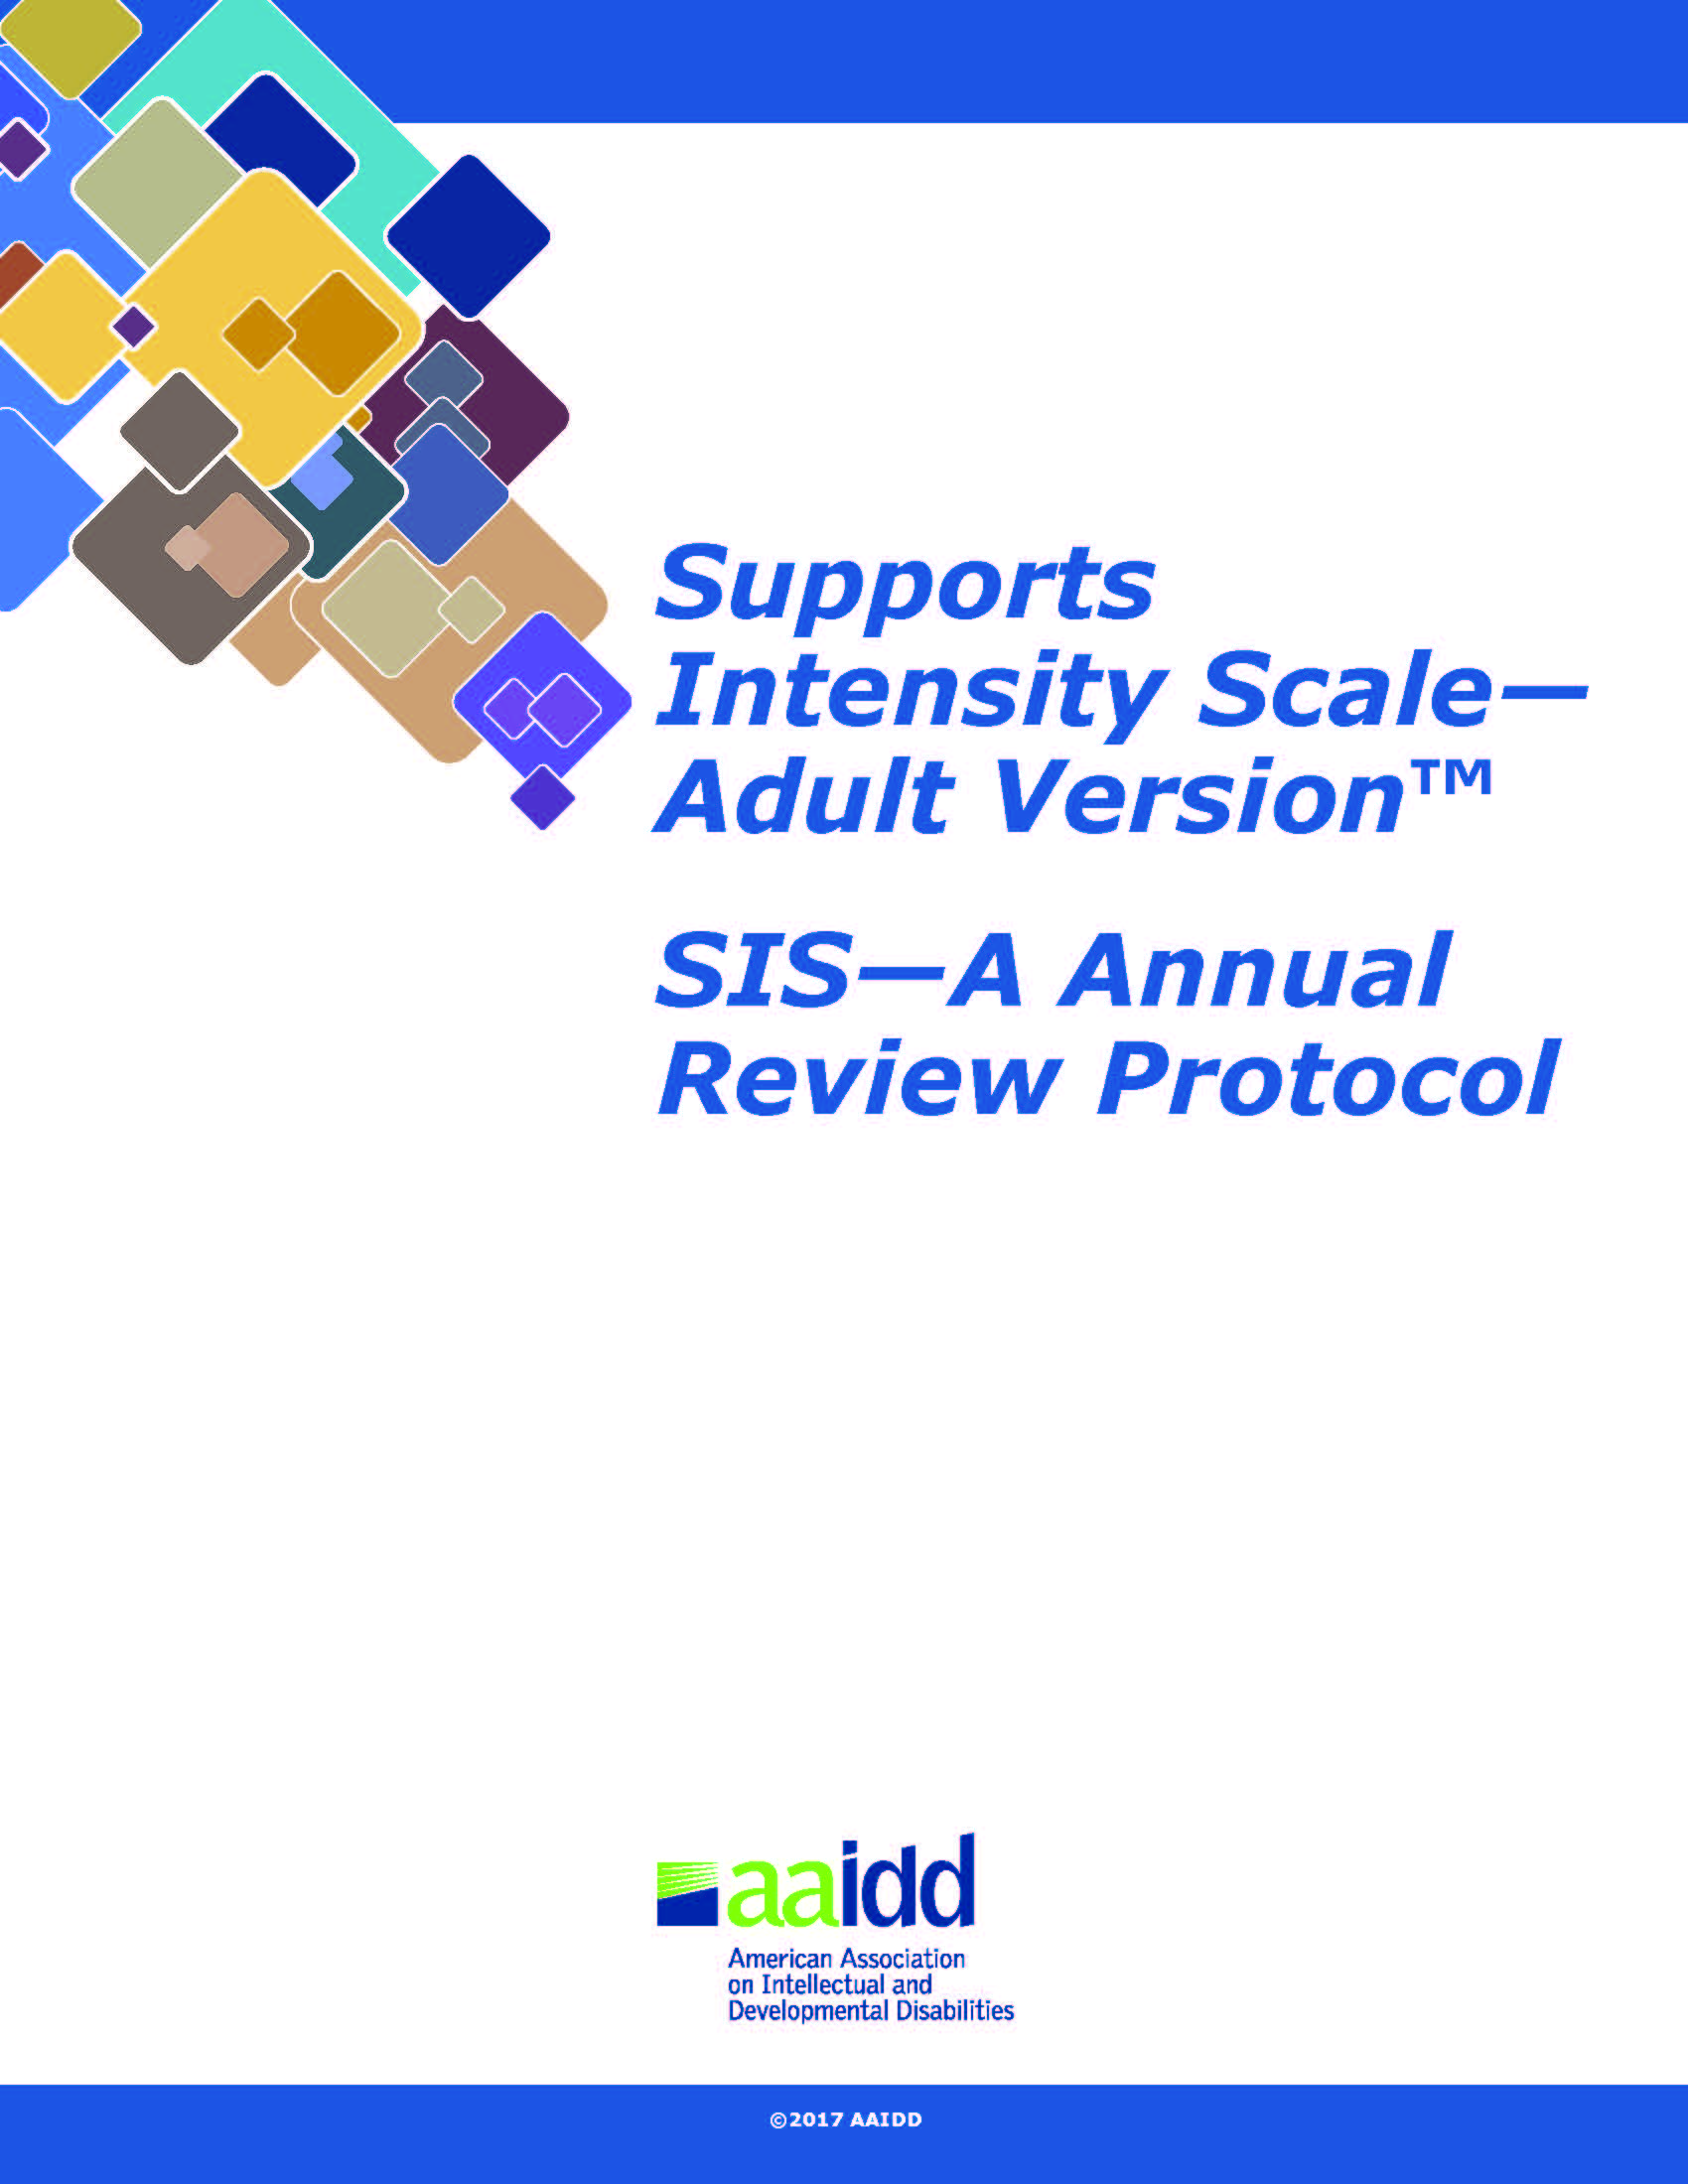 SIS-A Annual Review Protocol